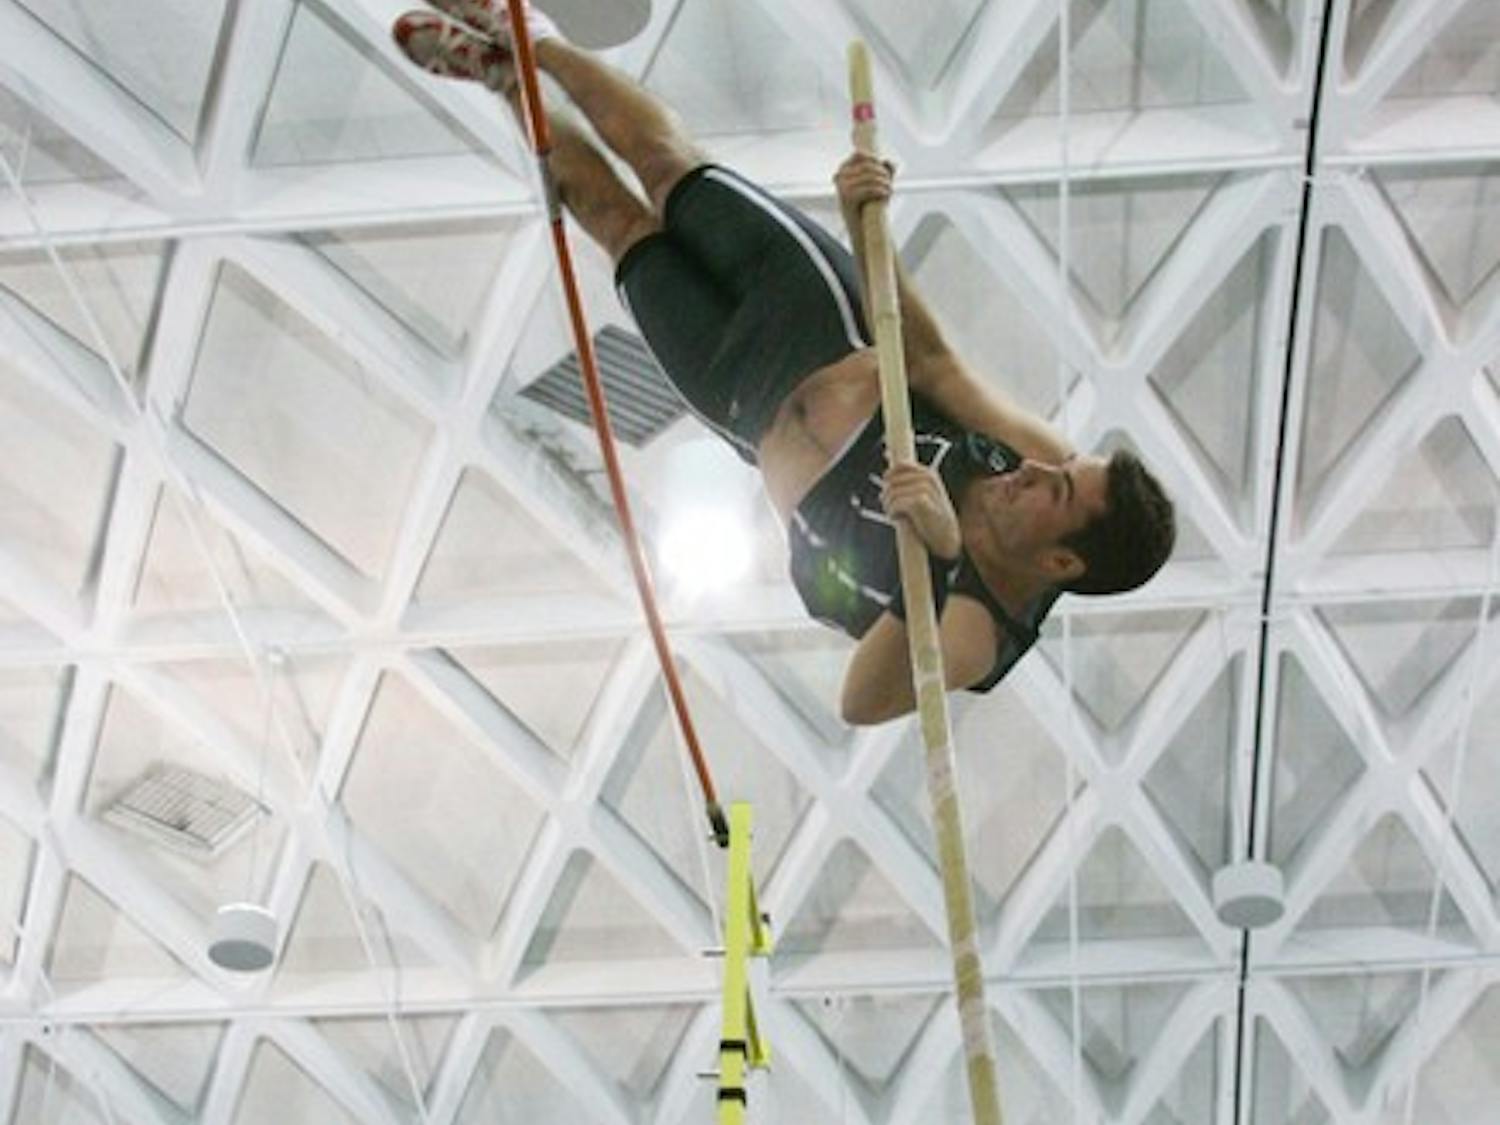 Ken DiCairano '10 placed first in men's pole vault at the Dartmouth Relays this weekend in Hanover.